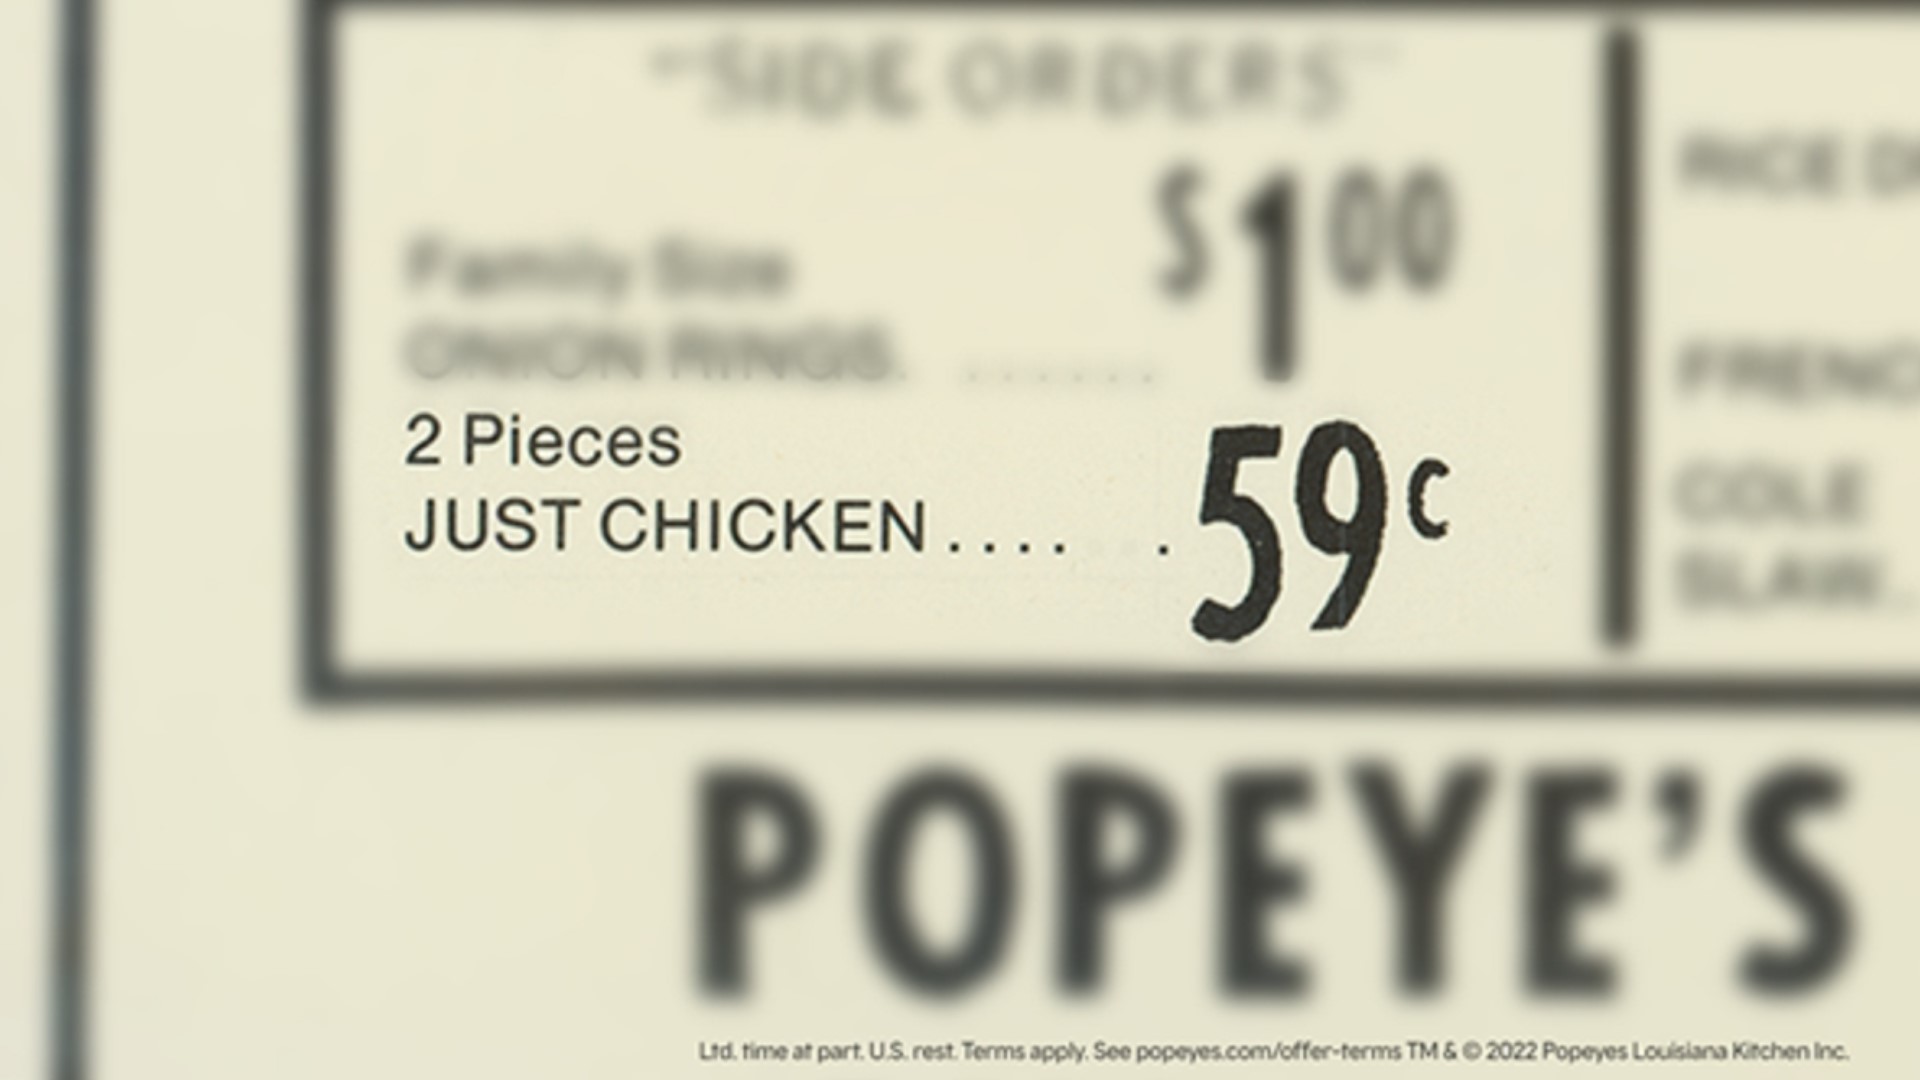 Popeyes is celebrating its 50th anniversary by selling two pieces of bone-in chicken for 59 cents